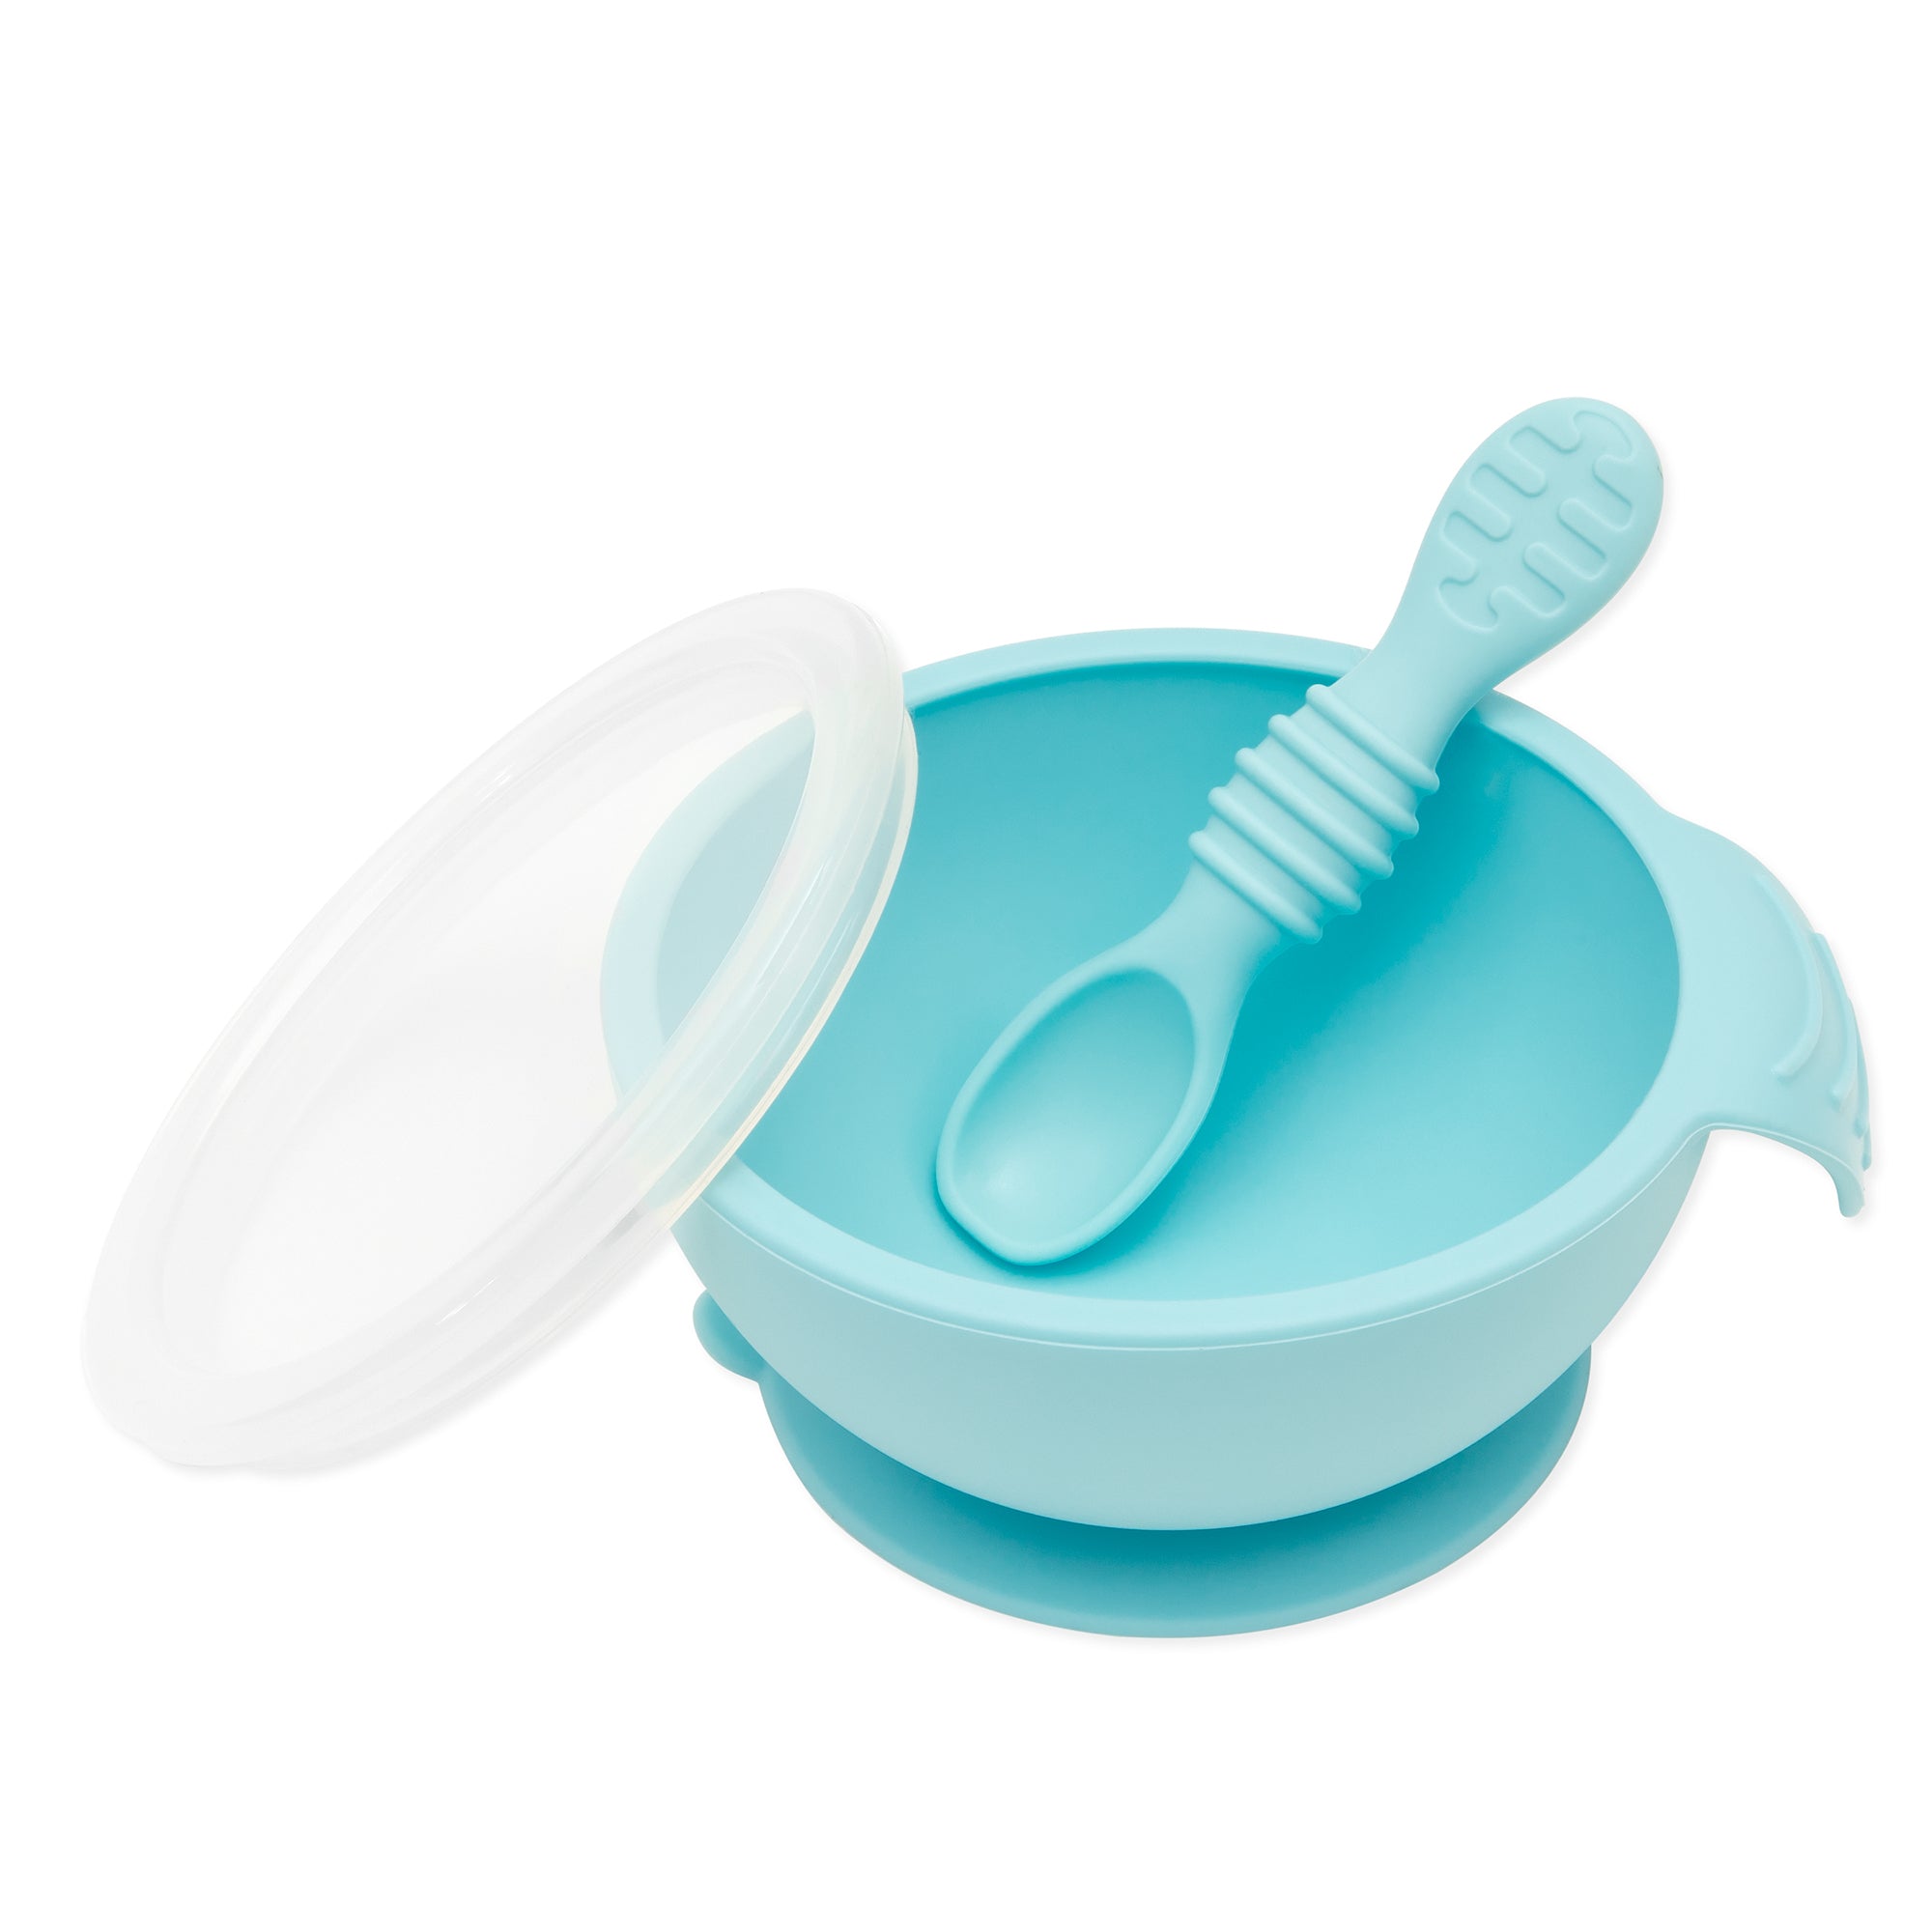 Silicone Baby Bowl - Blue